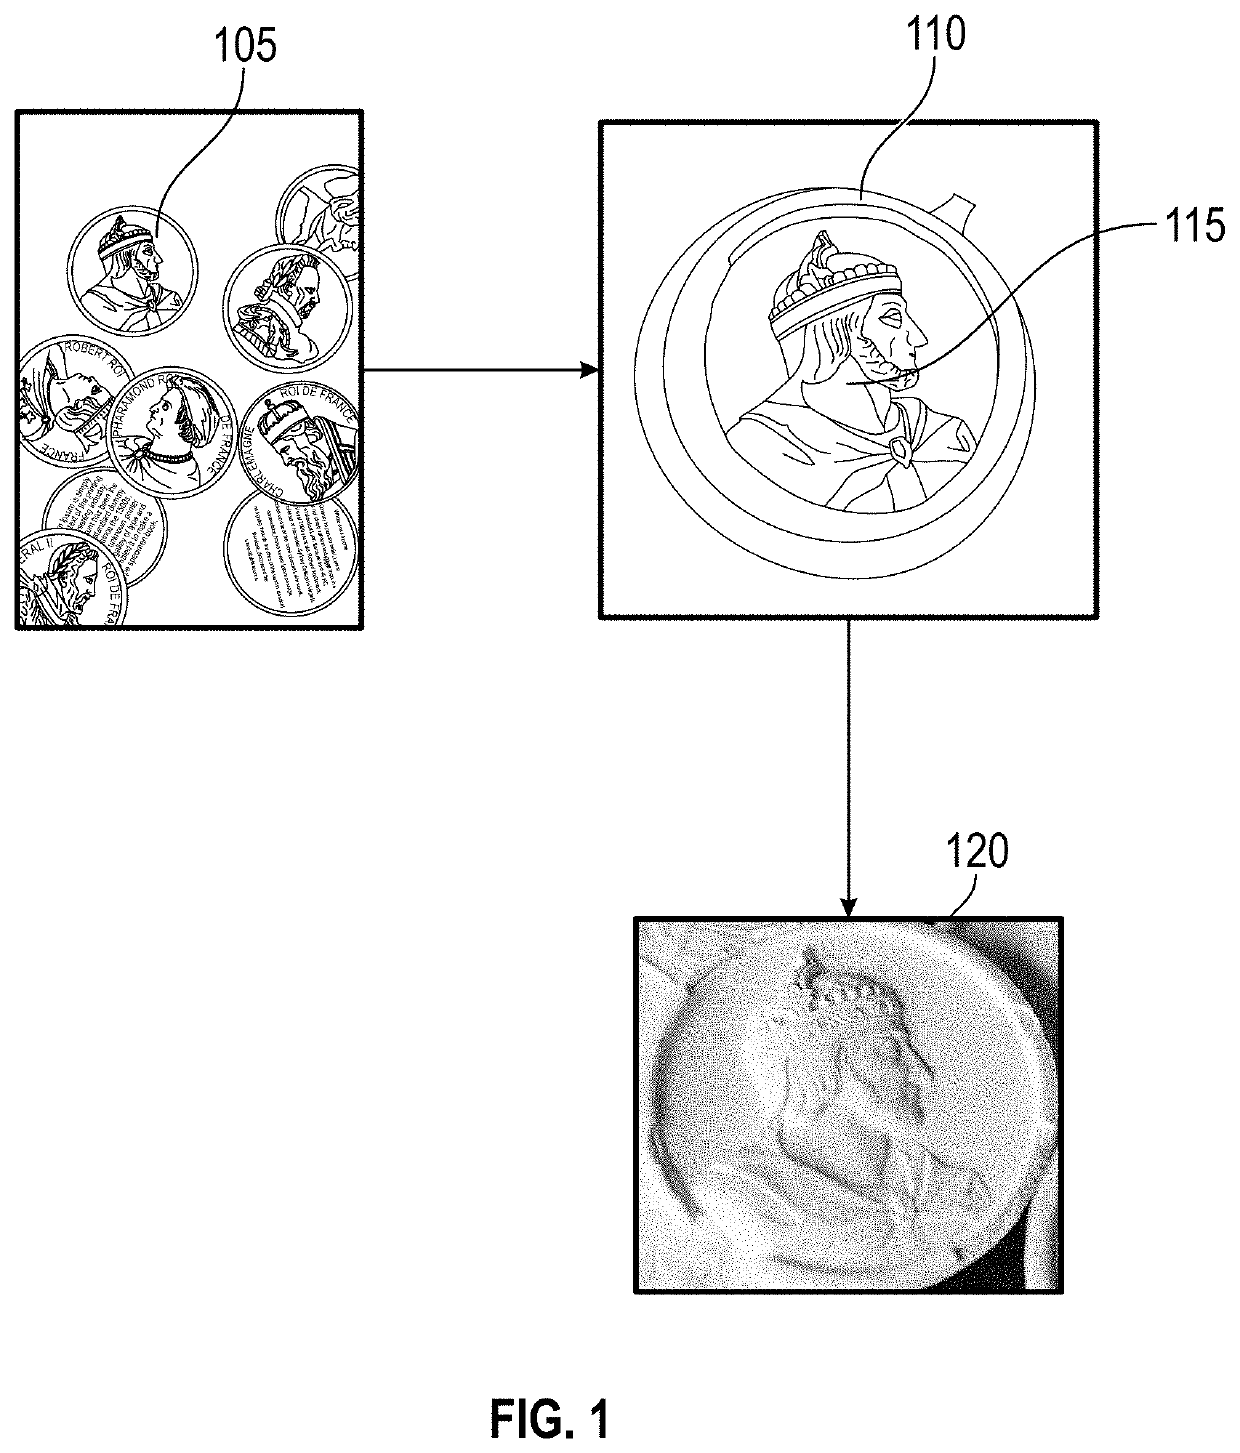 Method for Creating a Three-Dimensional Decorative Sculpture